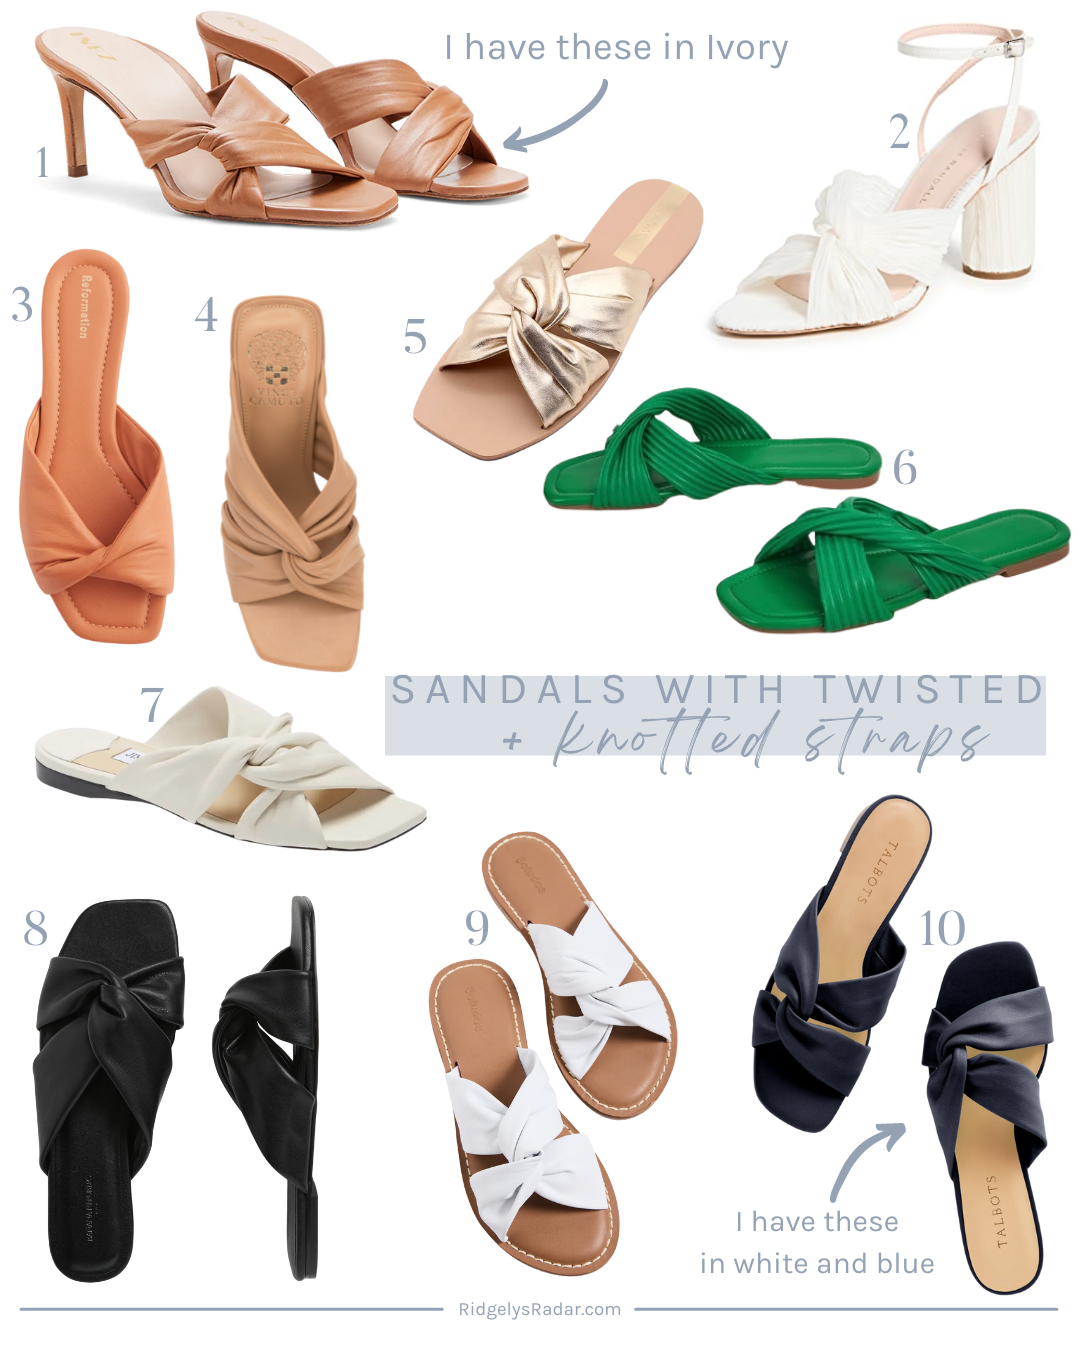 Looking for Chic and Comfortable sandals? The twisted and knotted straps are both! It is a trend that will make your feet and style happy!